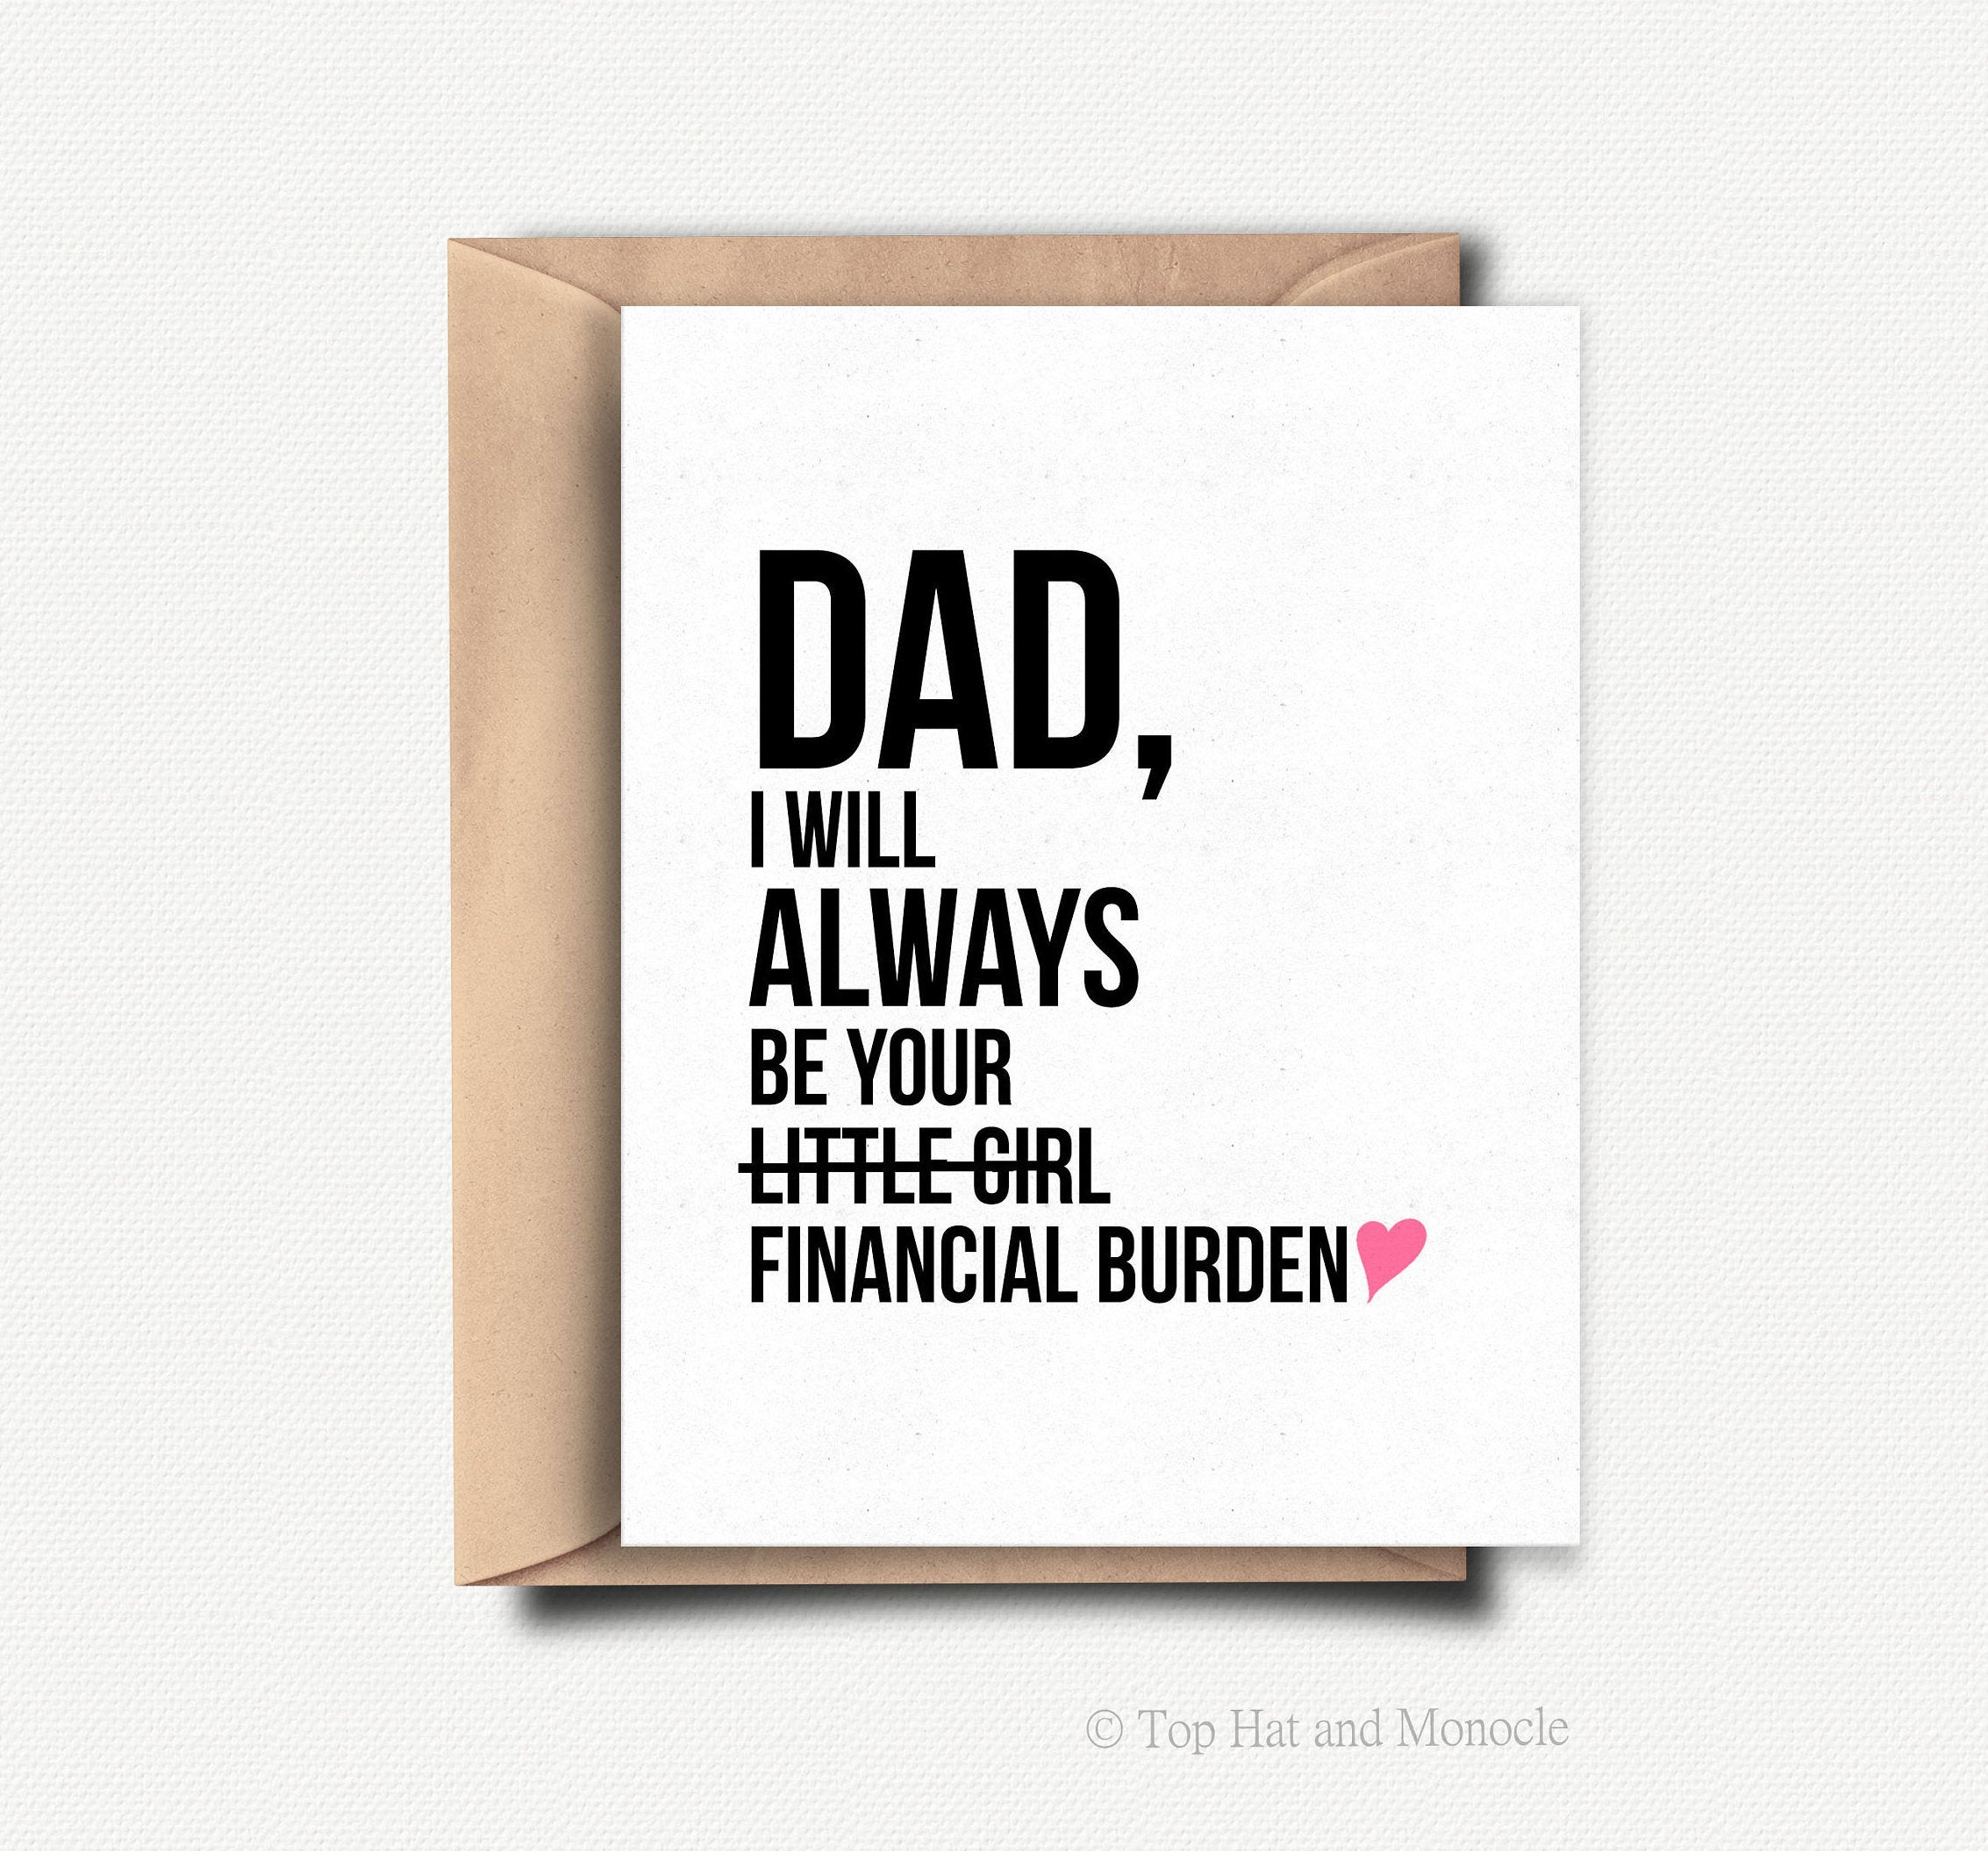 Happy Birthday Card Ideas For Dad Happy Fathers Day Card Funny Father Gift Fathers Day From Daughter Funny Gift For Fathers Day Idea Dad Birthday Card Sarcastic Gift For Dad